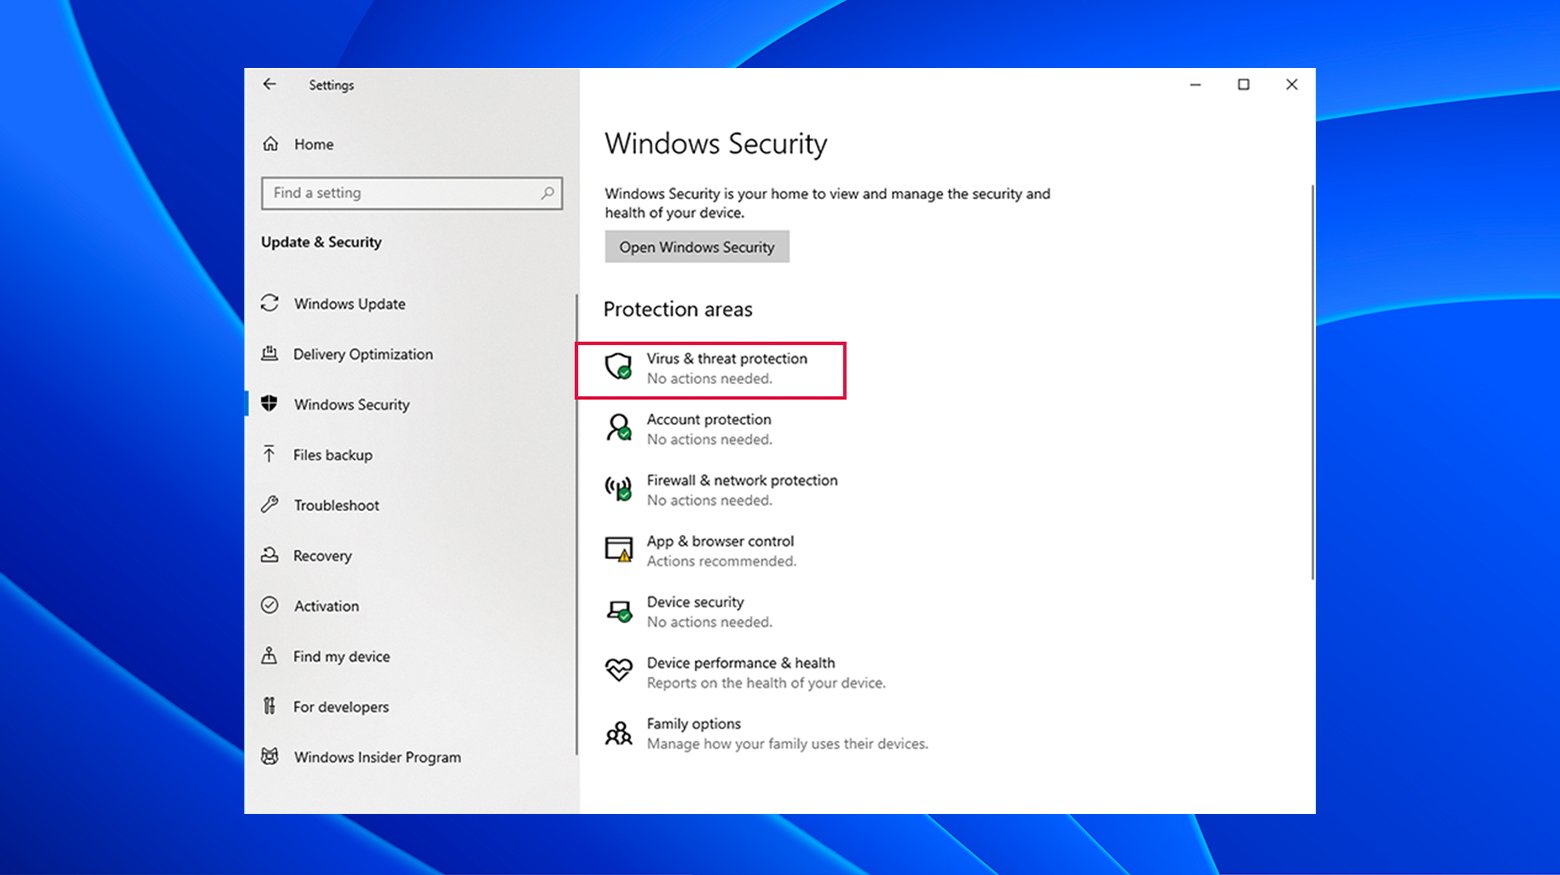 Virus and threat protection in Windows Security settings.